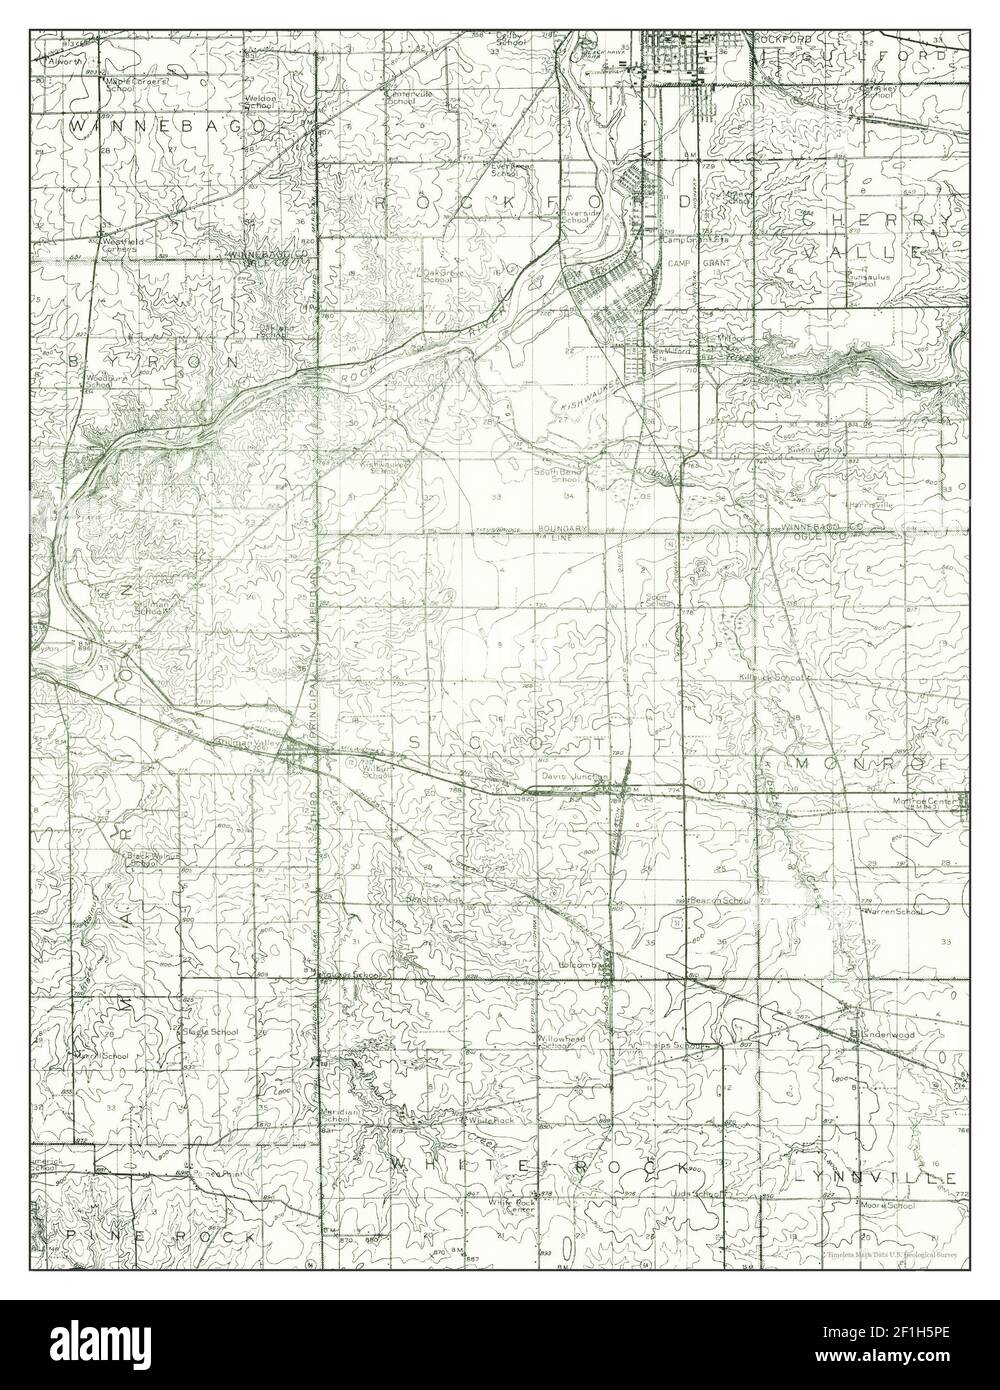 Kings, Illinois, map 1917, 1:62500, United States of America by Timeless Maps, data U.S. Geological Survey Stock Photo